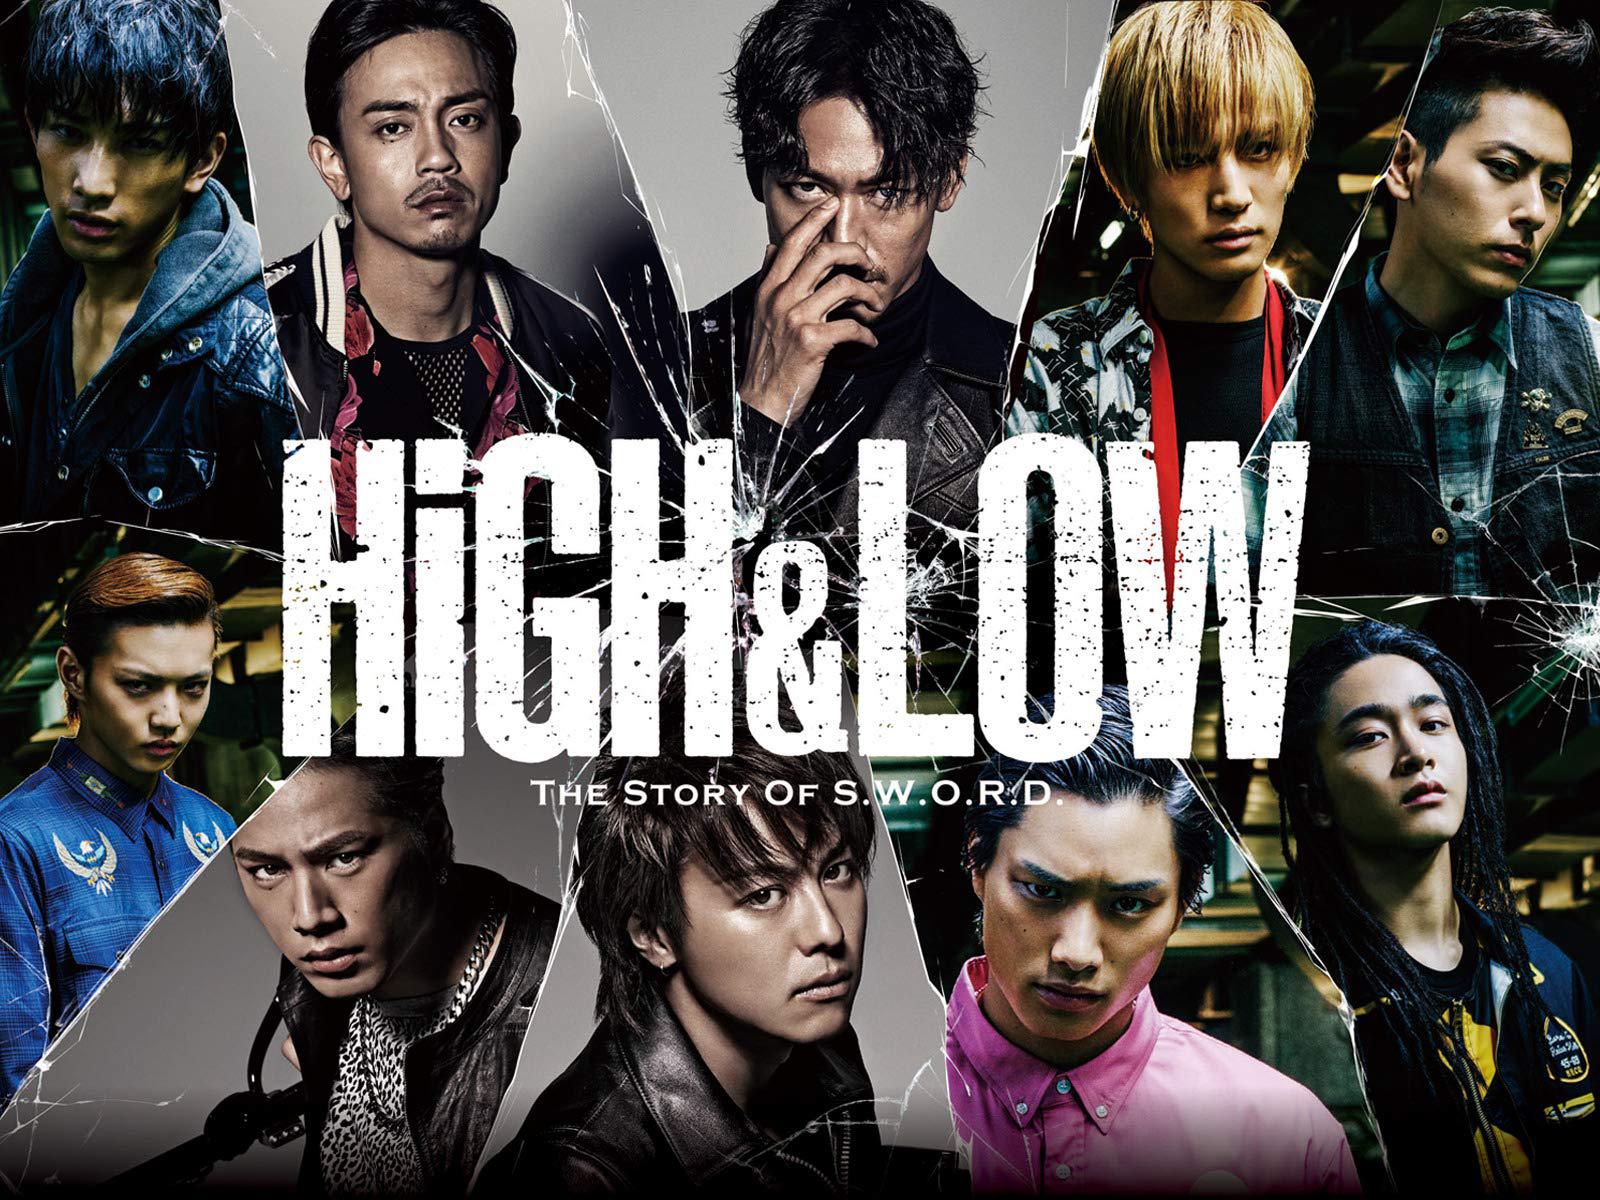 HiGH&LOW THE STORY OF S.W.O.R.D